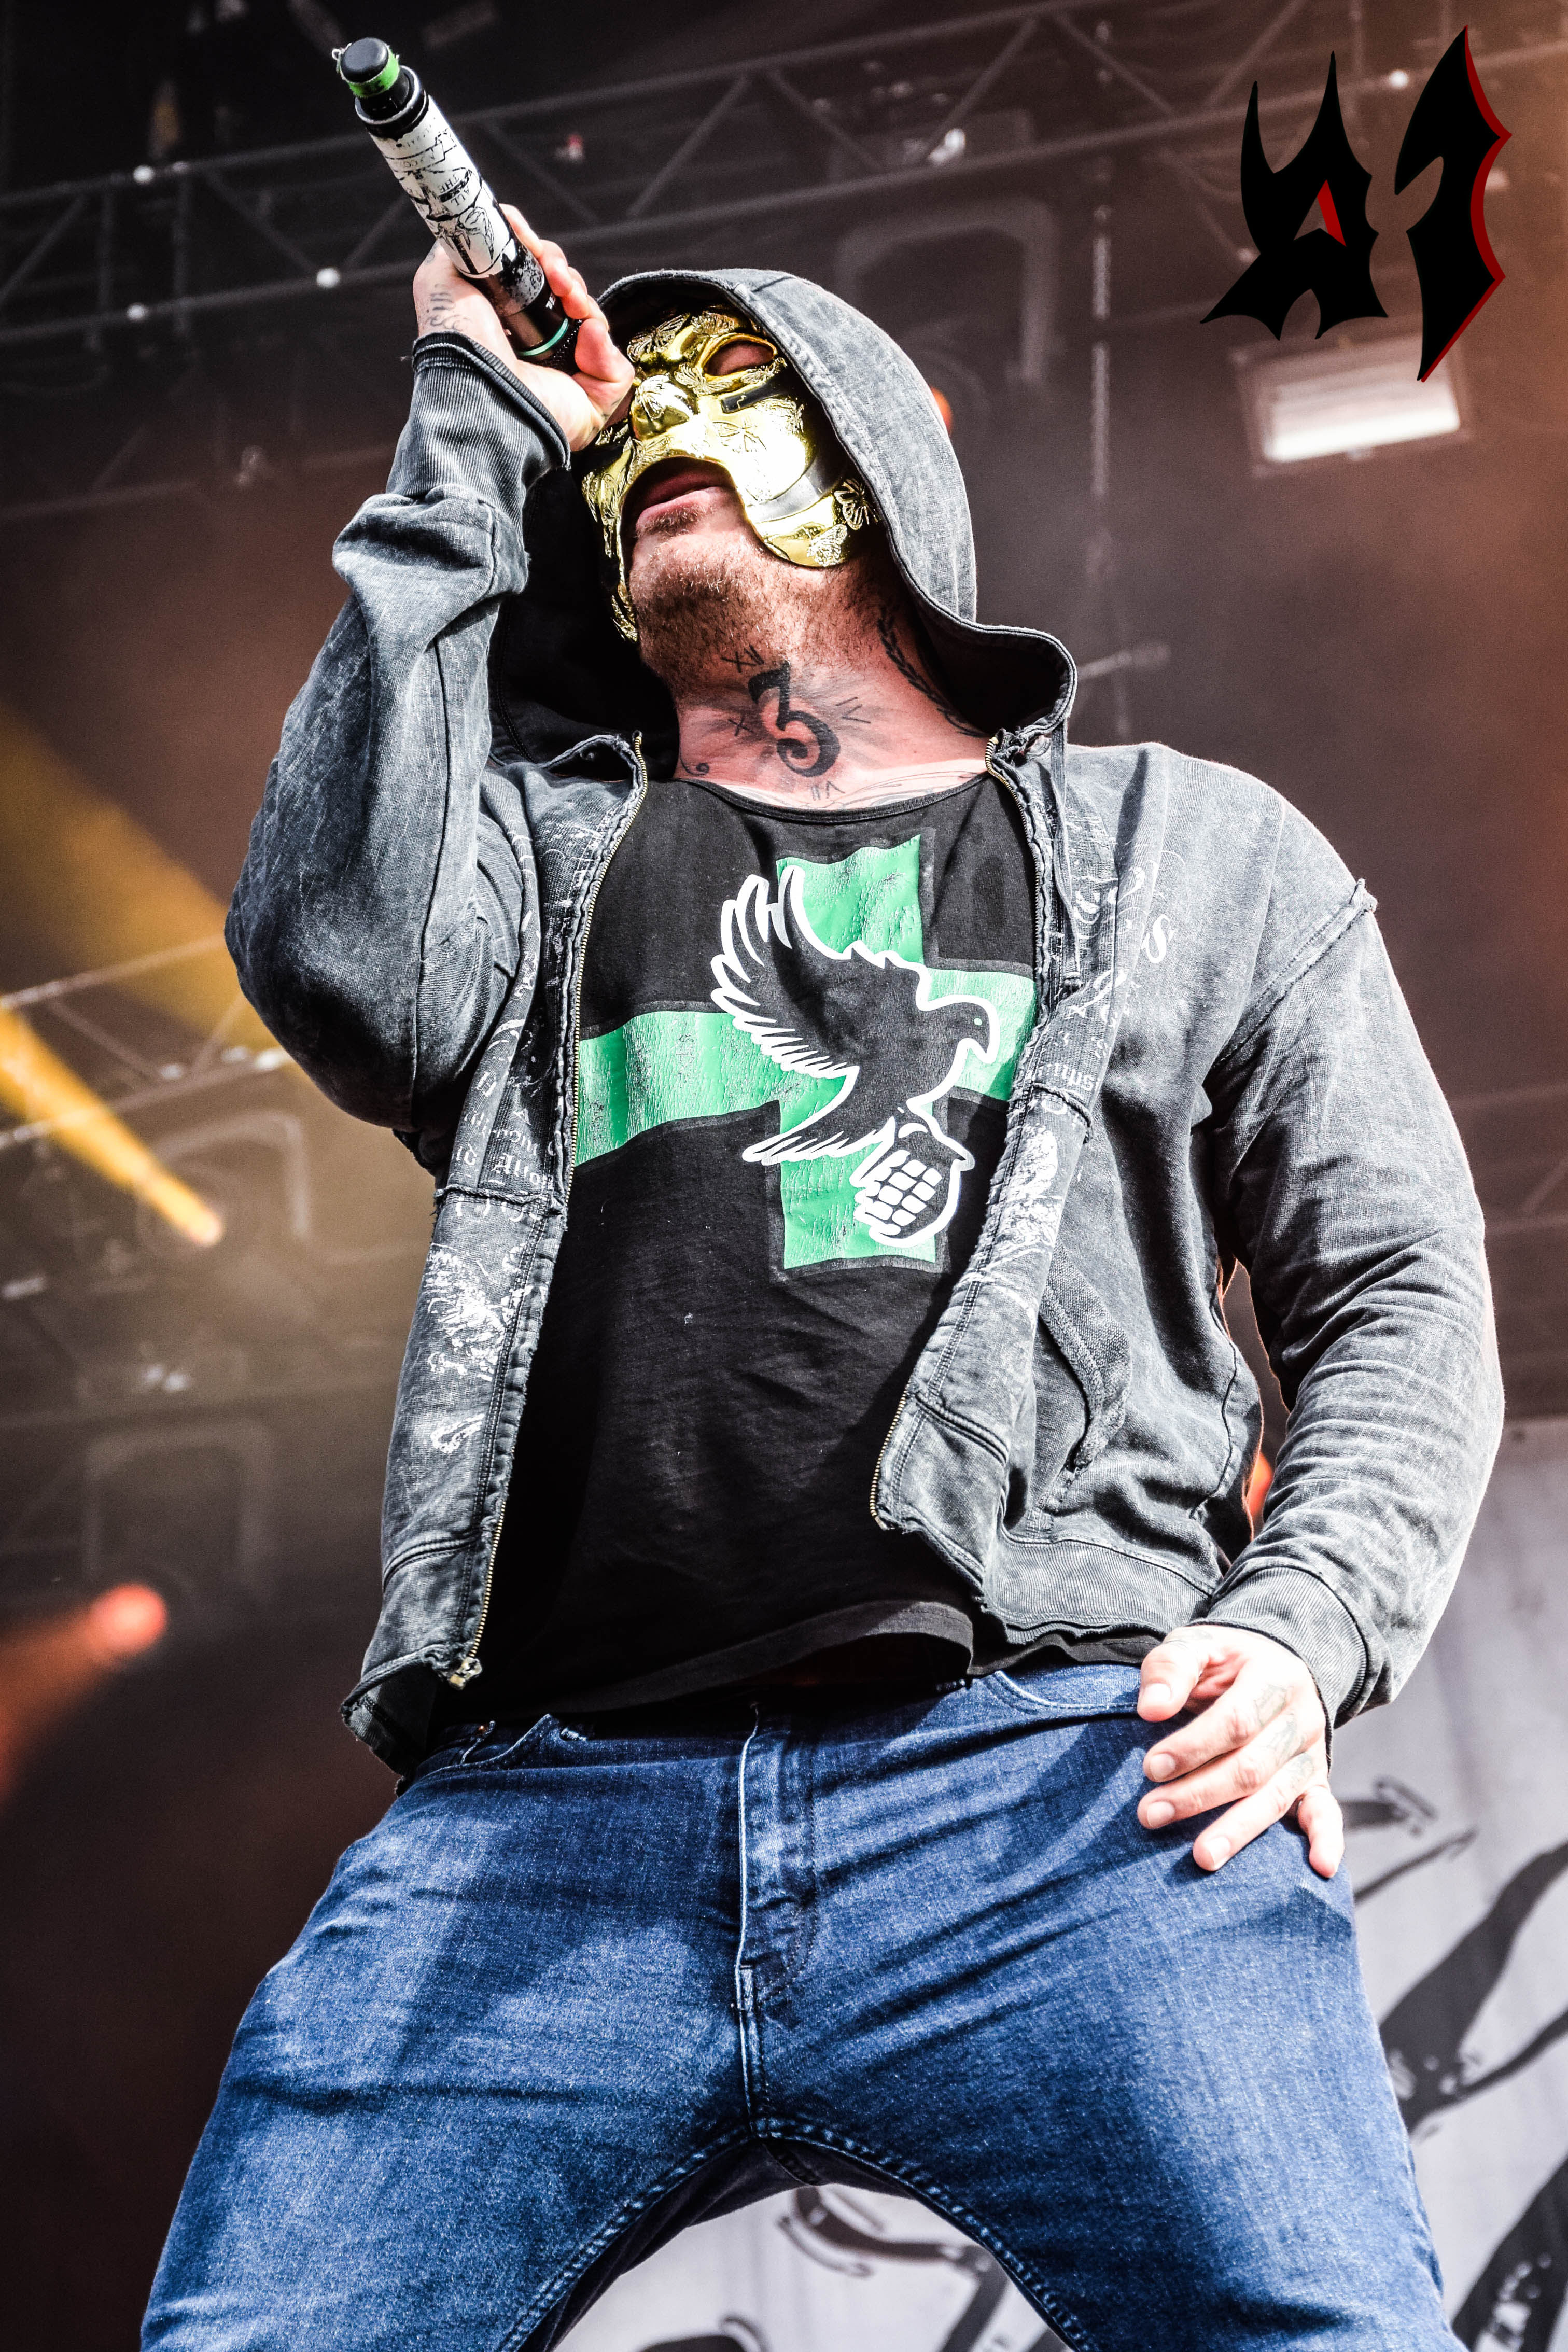 Donwload 2018 – Day 2 - Hollywood Undead 17